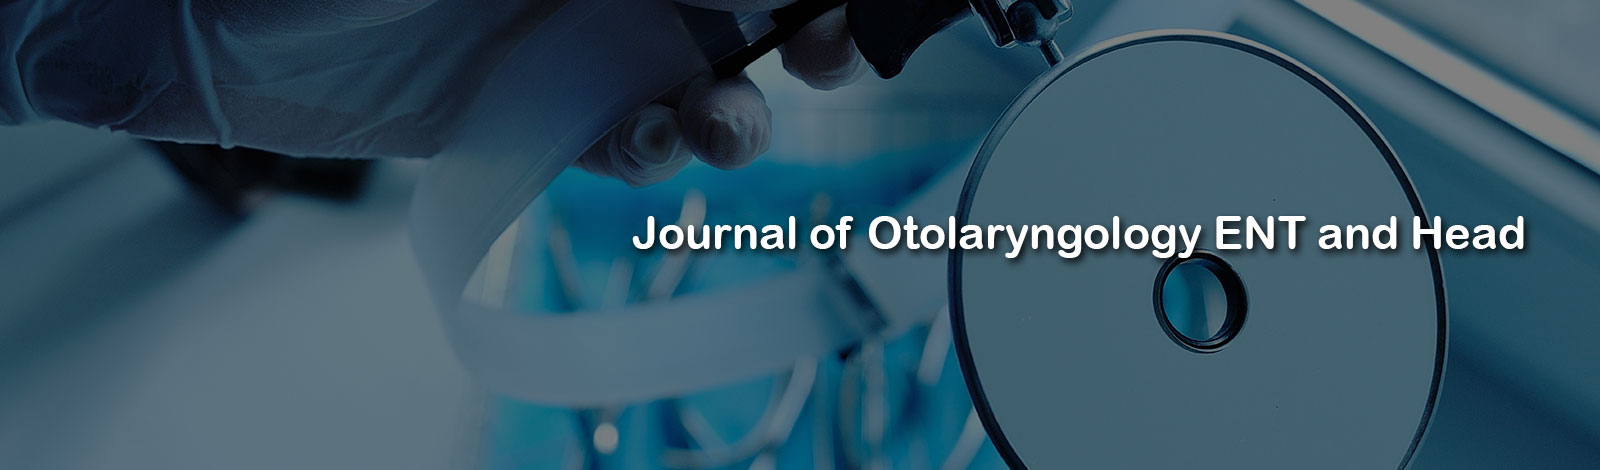 Journal of Otolaryngology Ent and Head